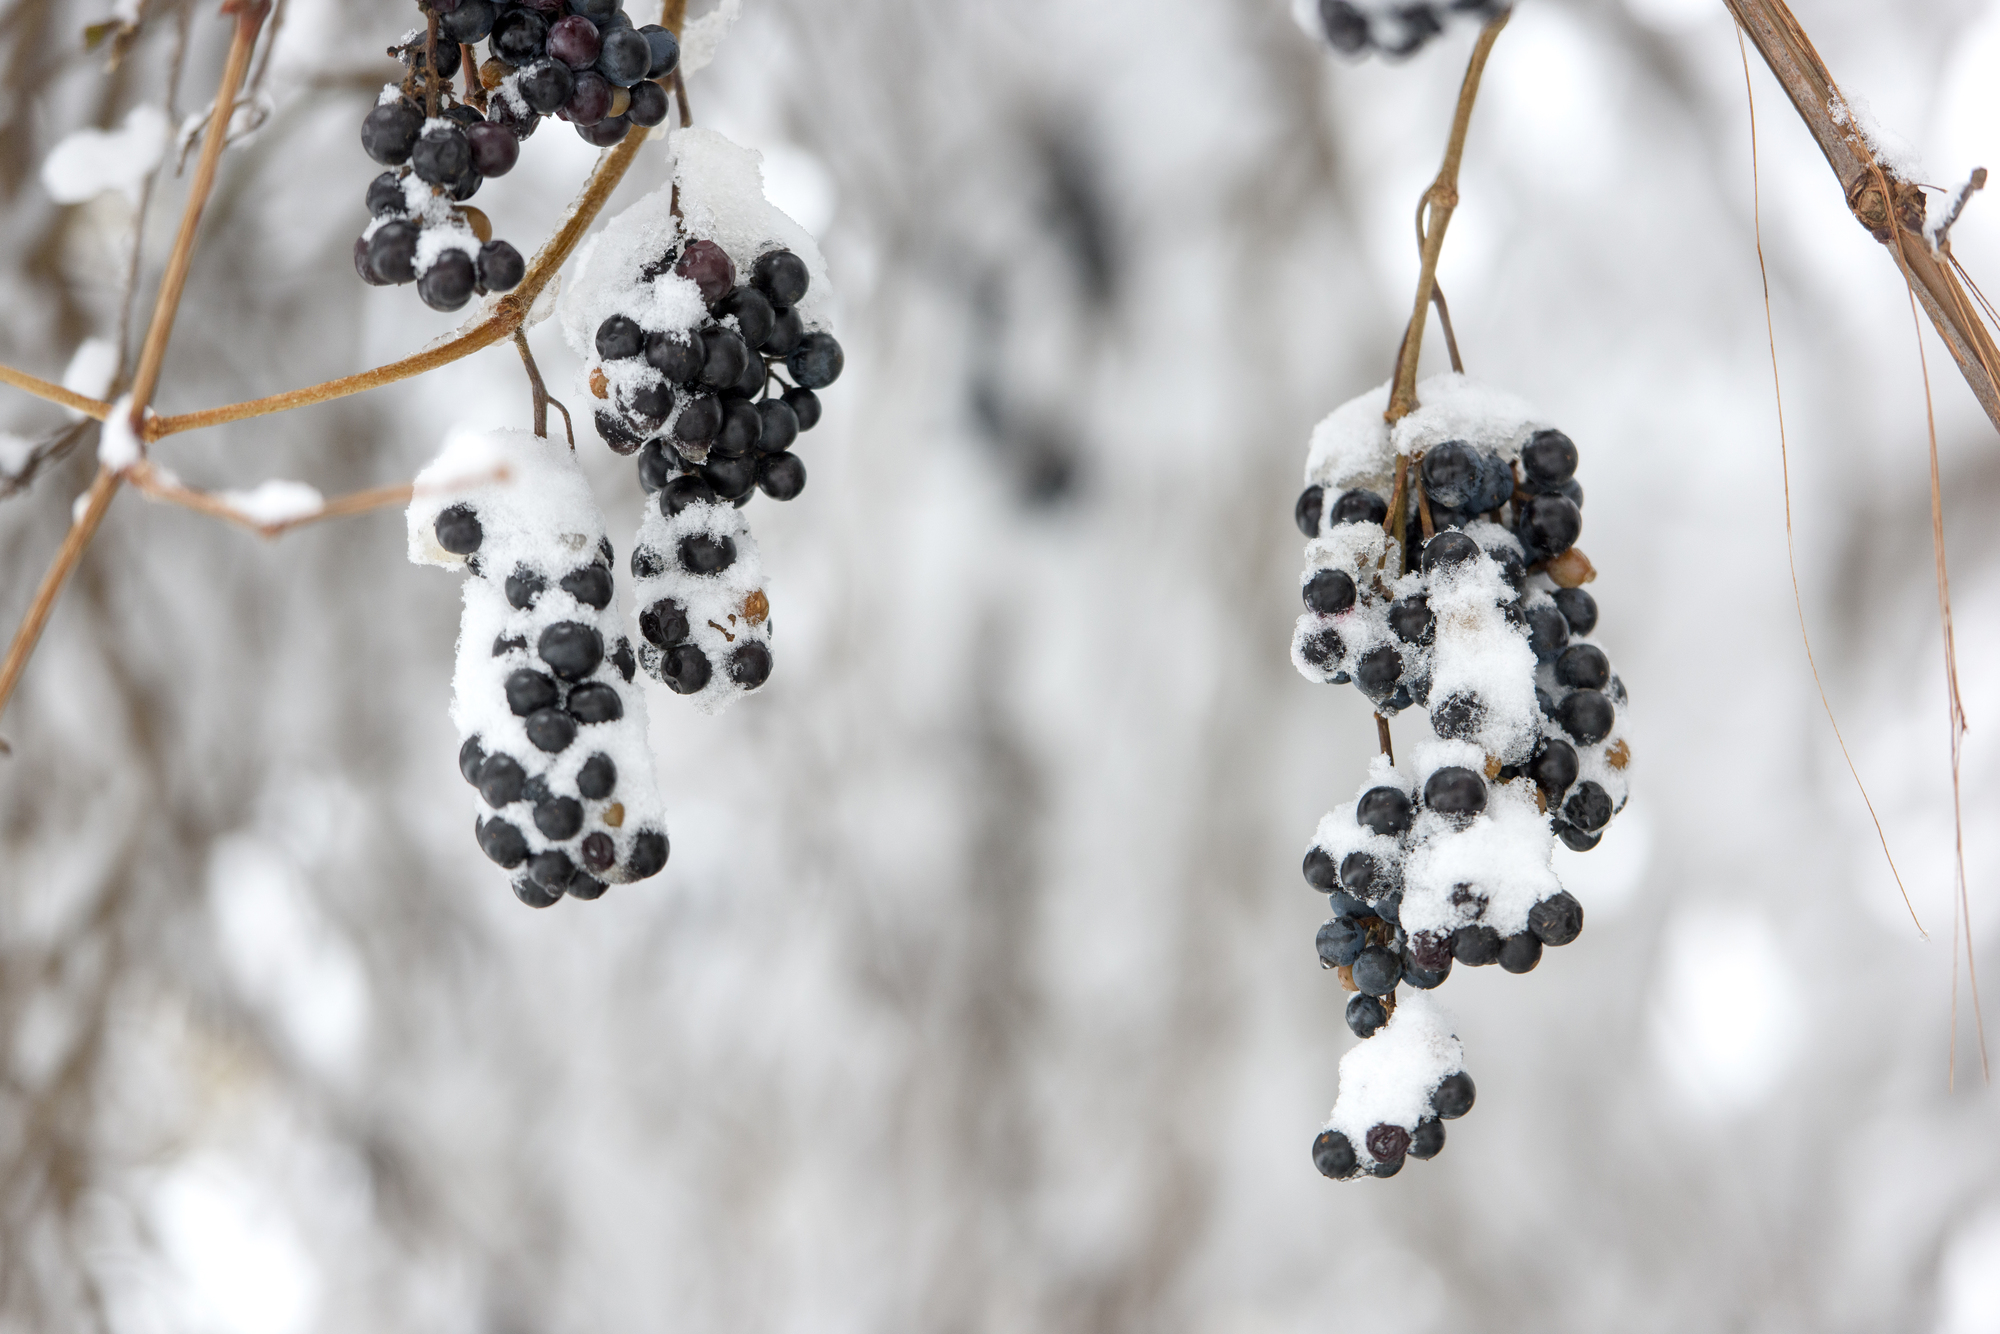 Vine grapes covered snow in garden. cloudy day